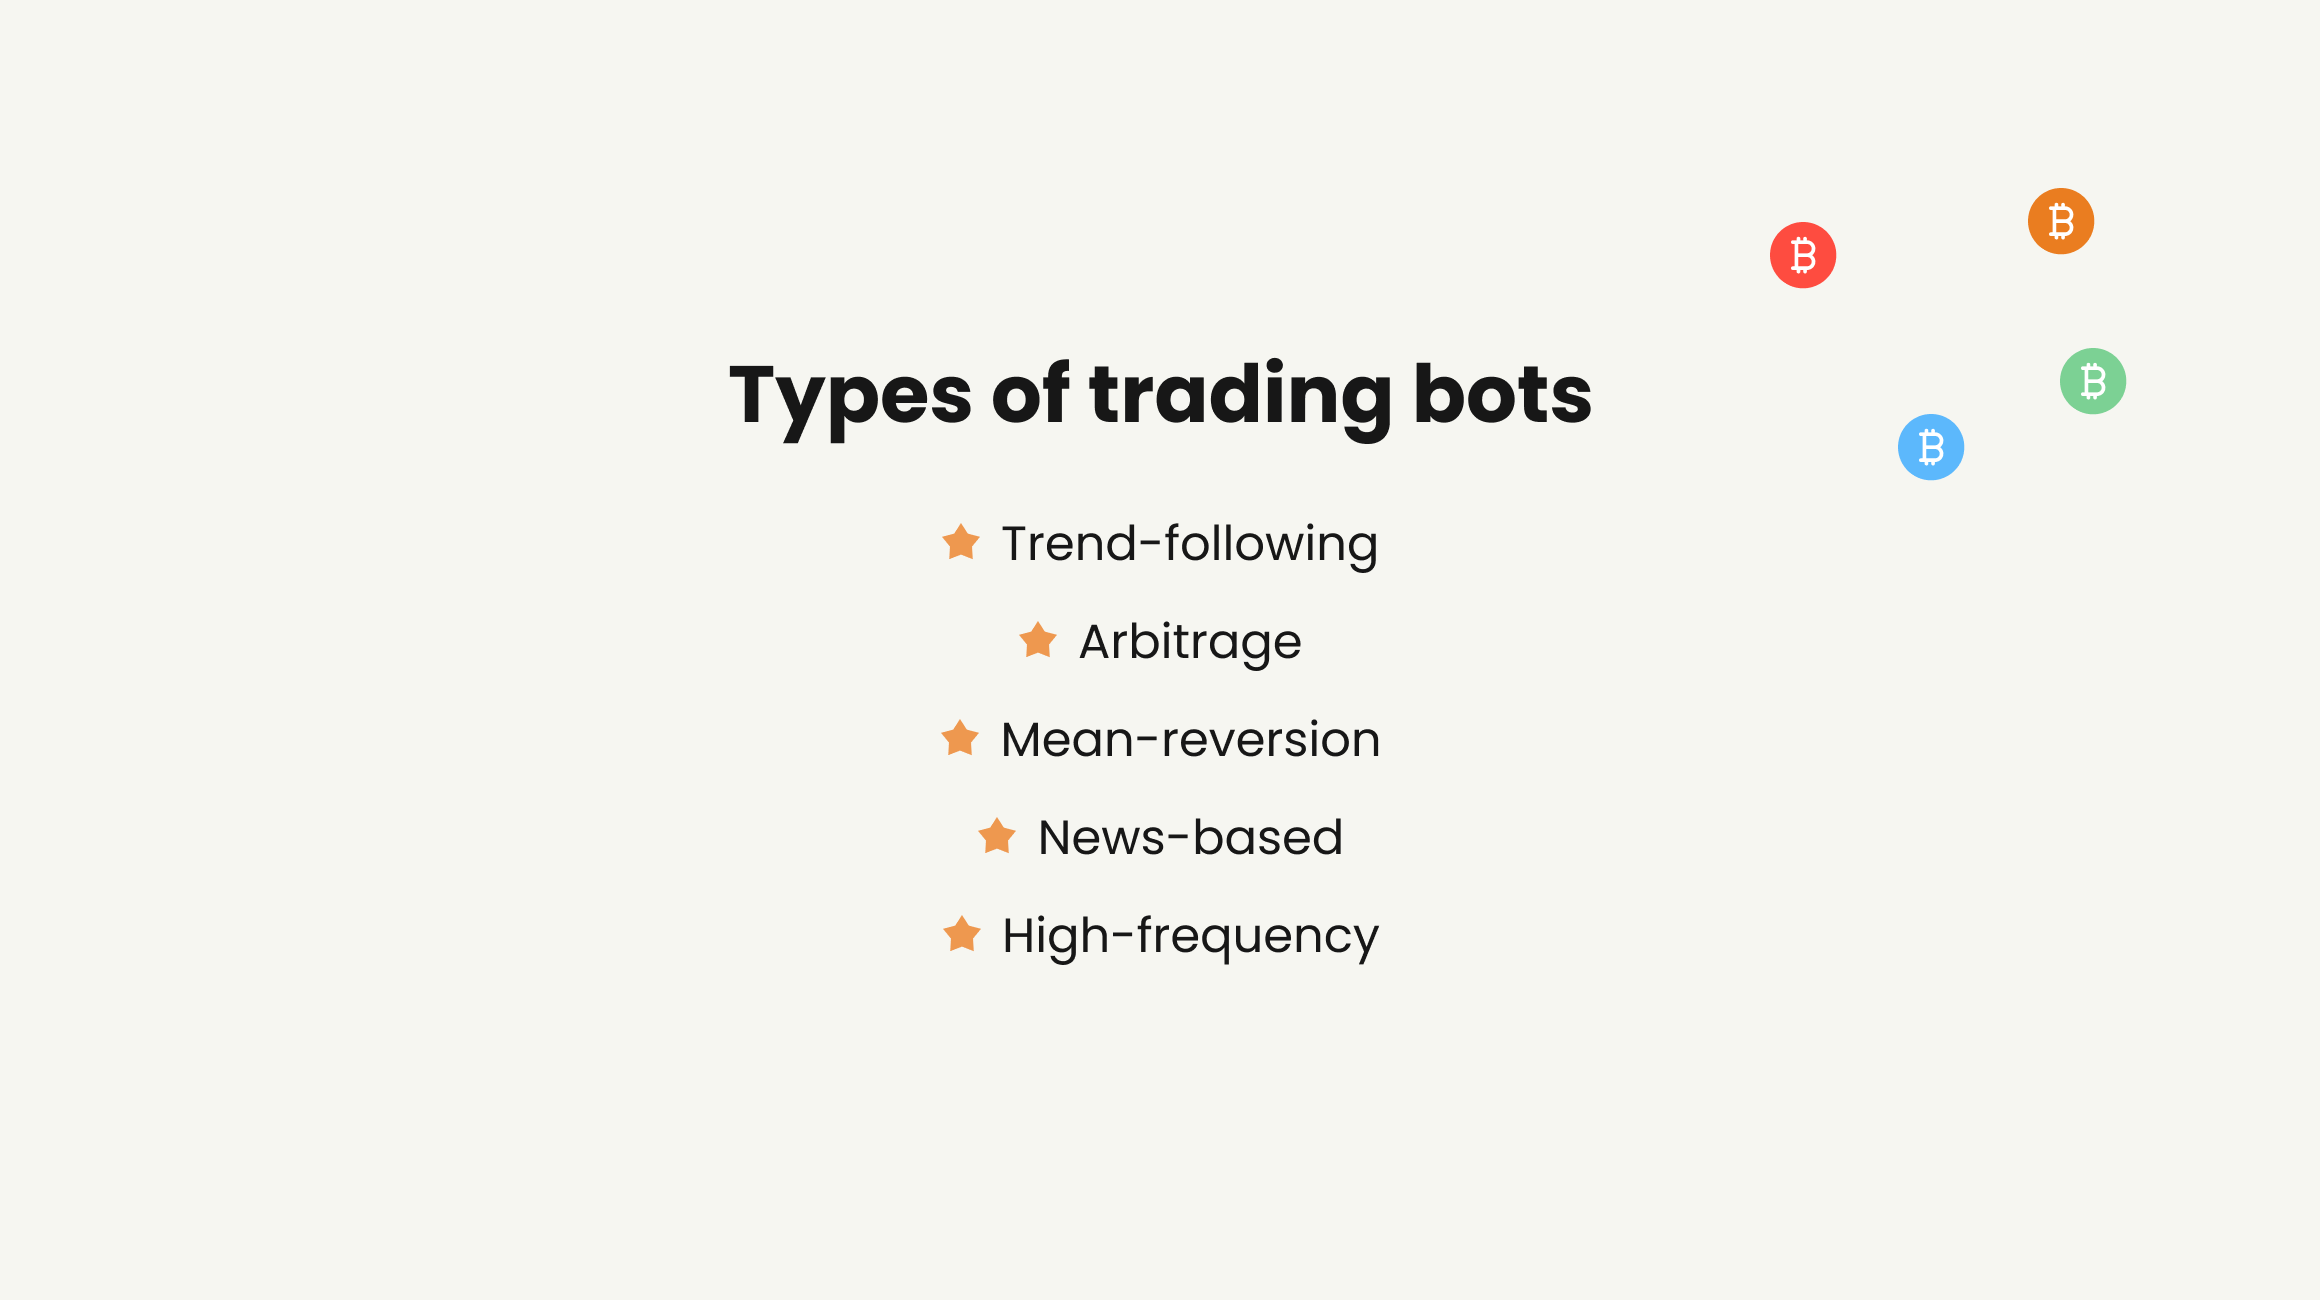 Types of trading bots